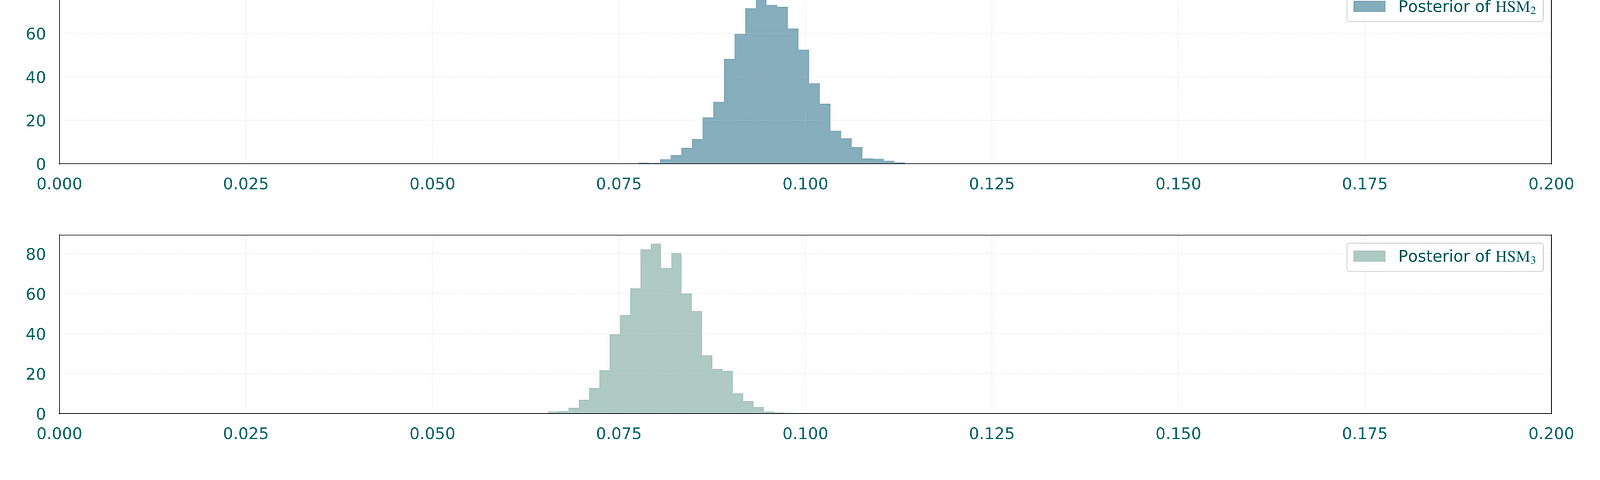 Posterior distributions of the conversion rates